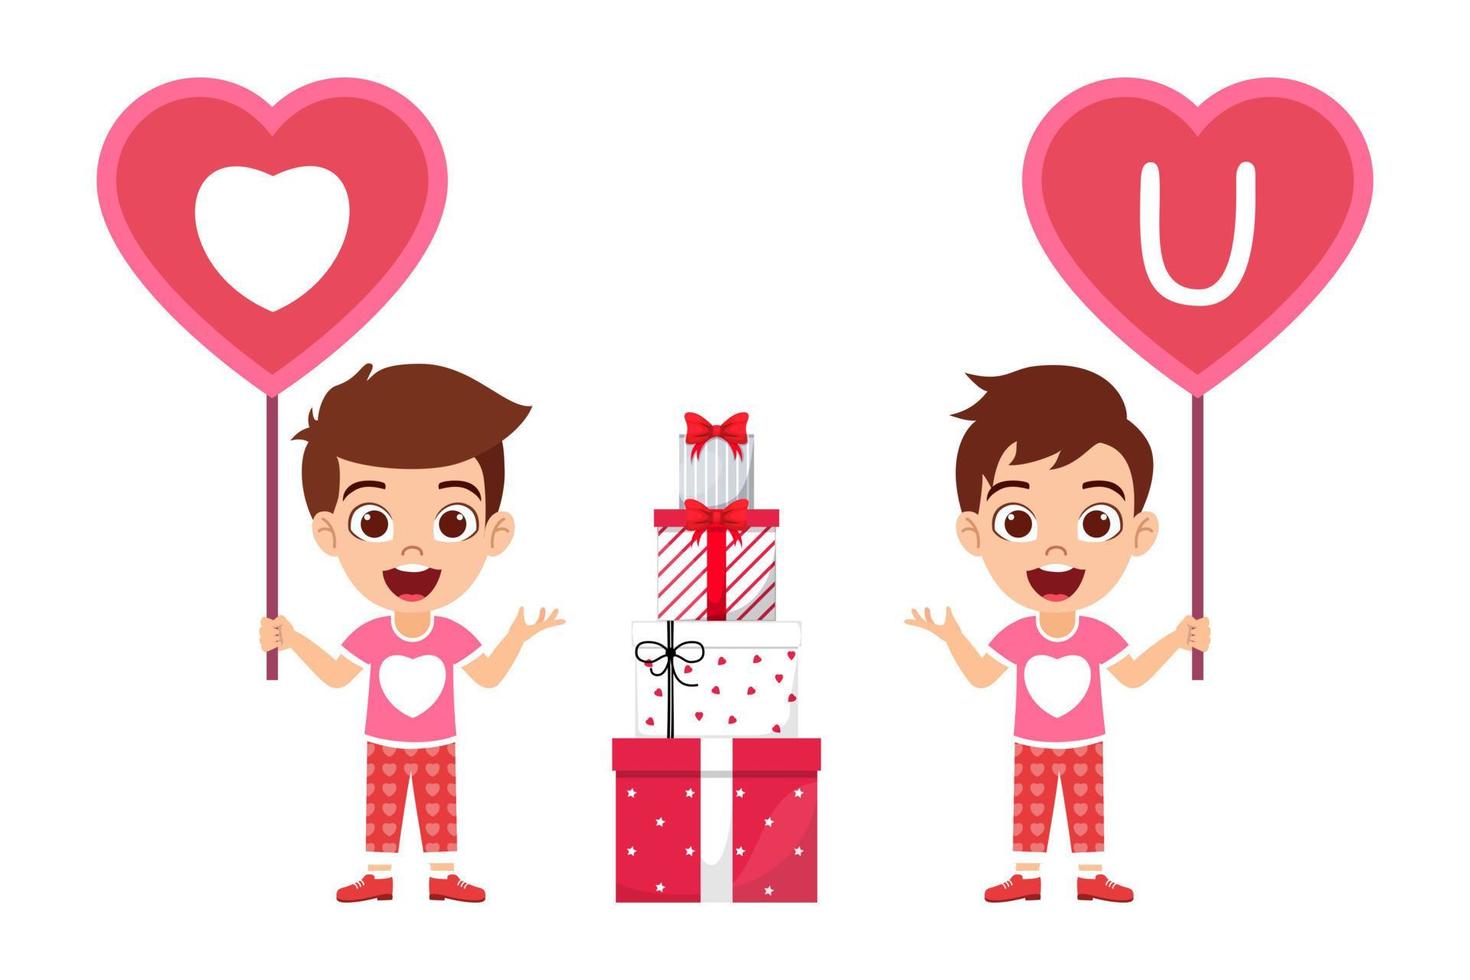 Happy cute beautiful kid character wearing t-shirt with hart shape symbol holding hart shape placard with gift boxes vector